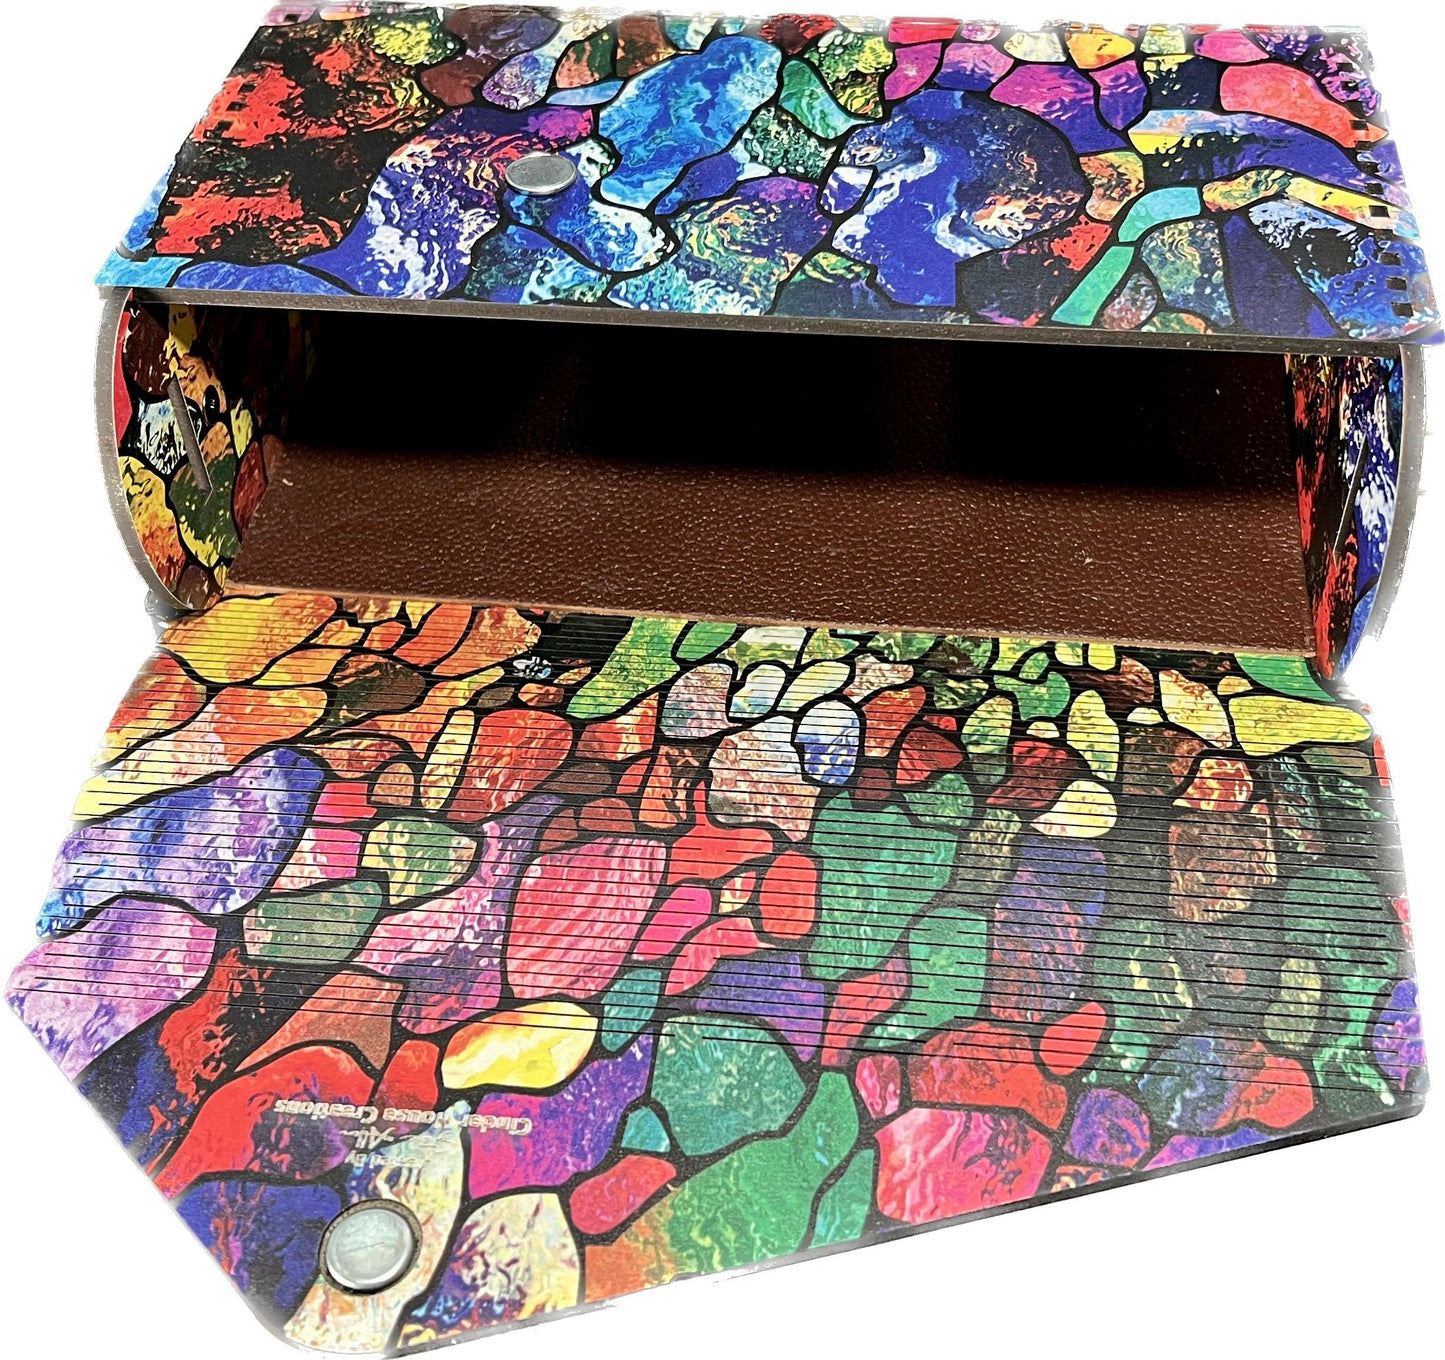 “Stained Glass” Wood Purse or Clutch